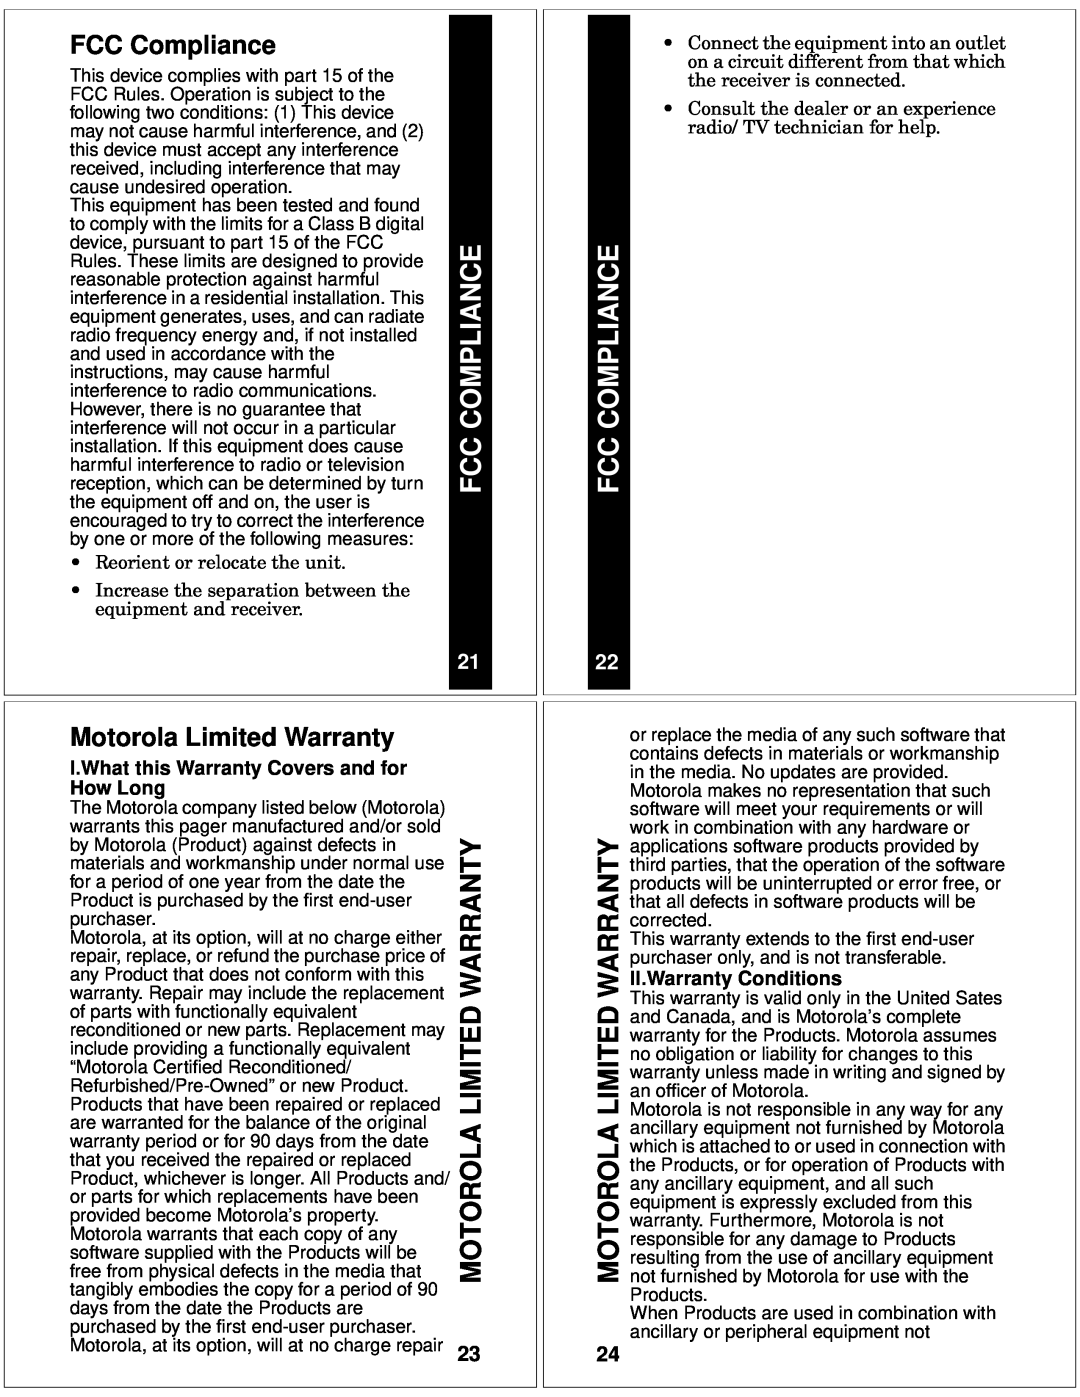 Motorola T10 manual Fcc Compliance, FCC Compliance, Motorola Limited Warranty, I.What this Warranty Covers and for How Long 